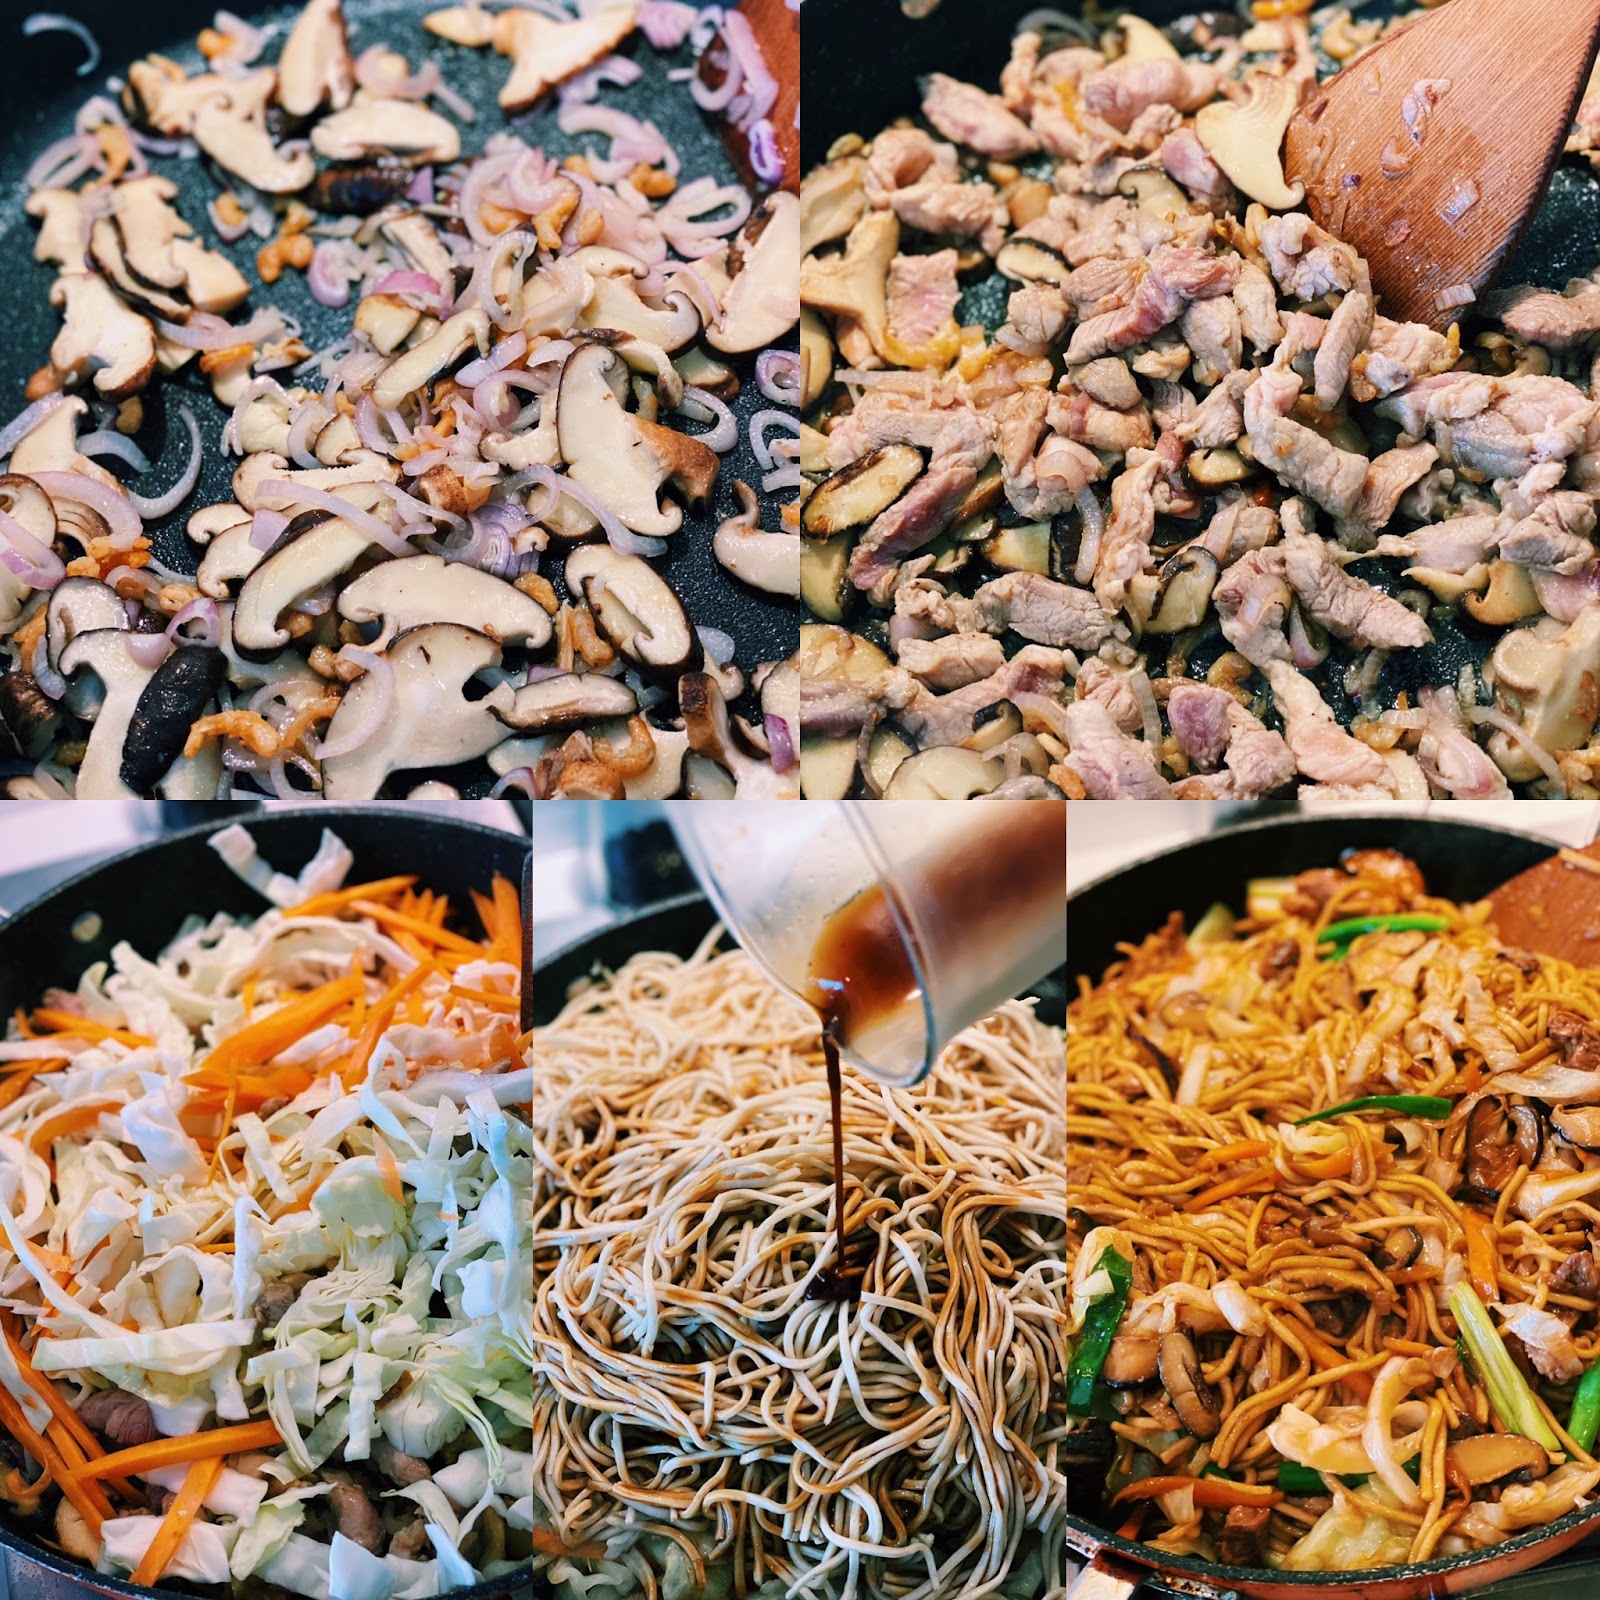 Taiwanese Chow Mein (Authentic Traditional Recipe!)